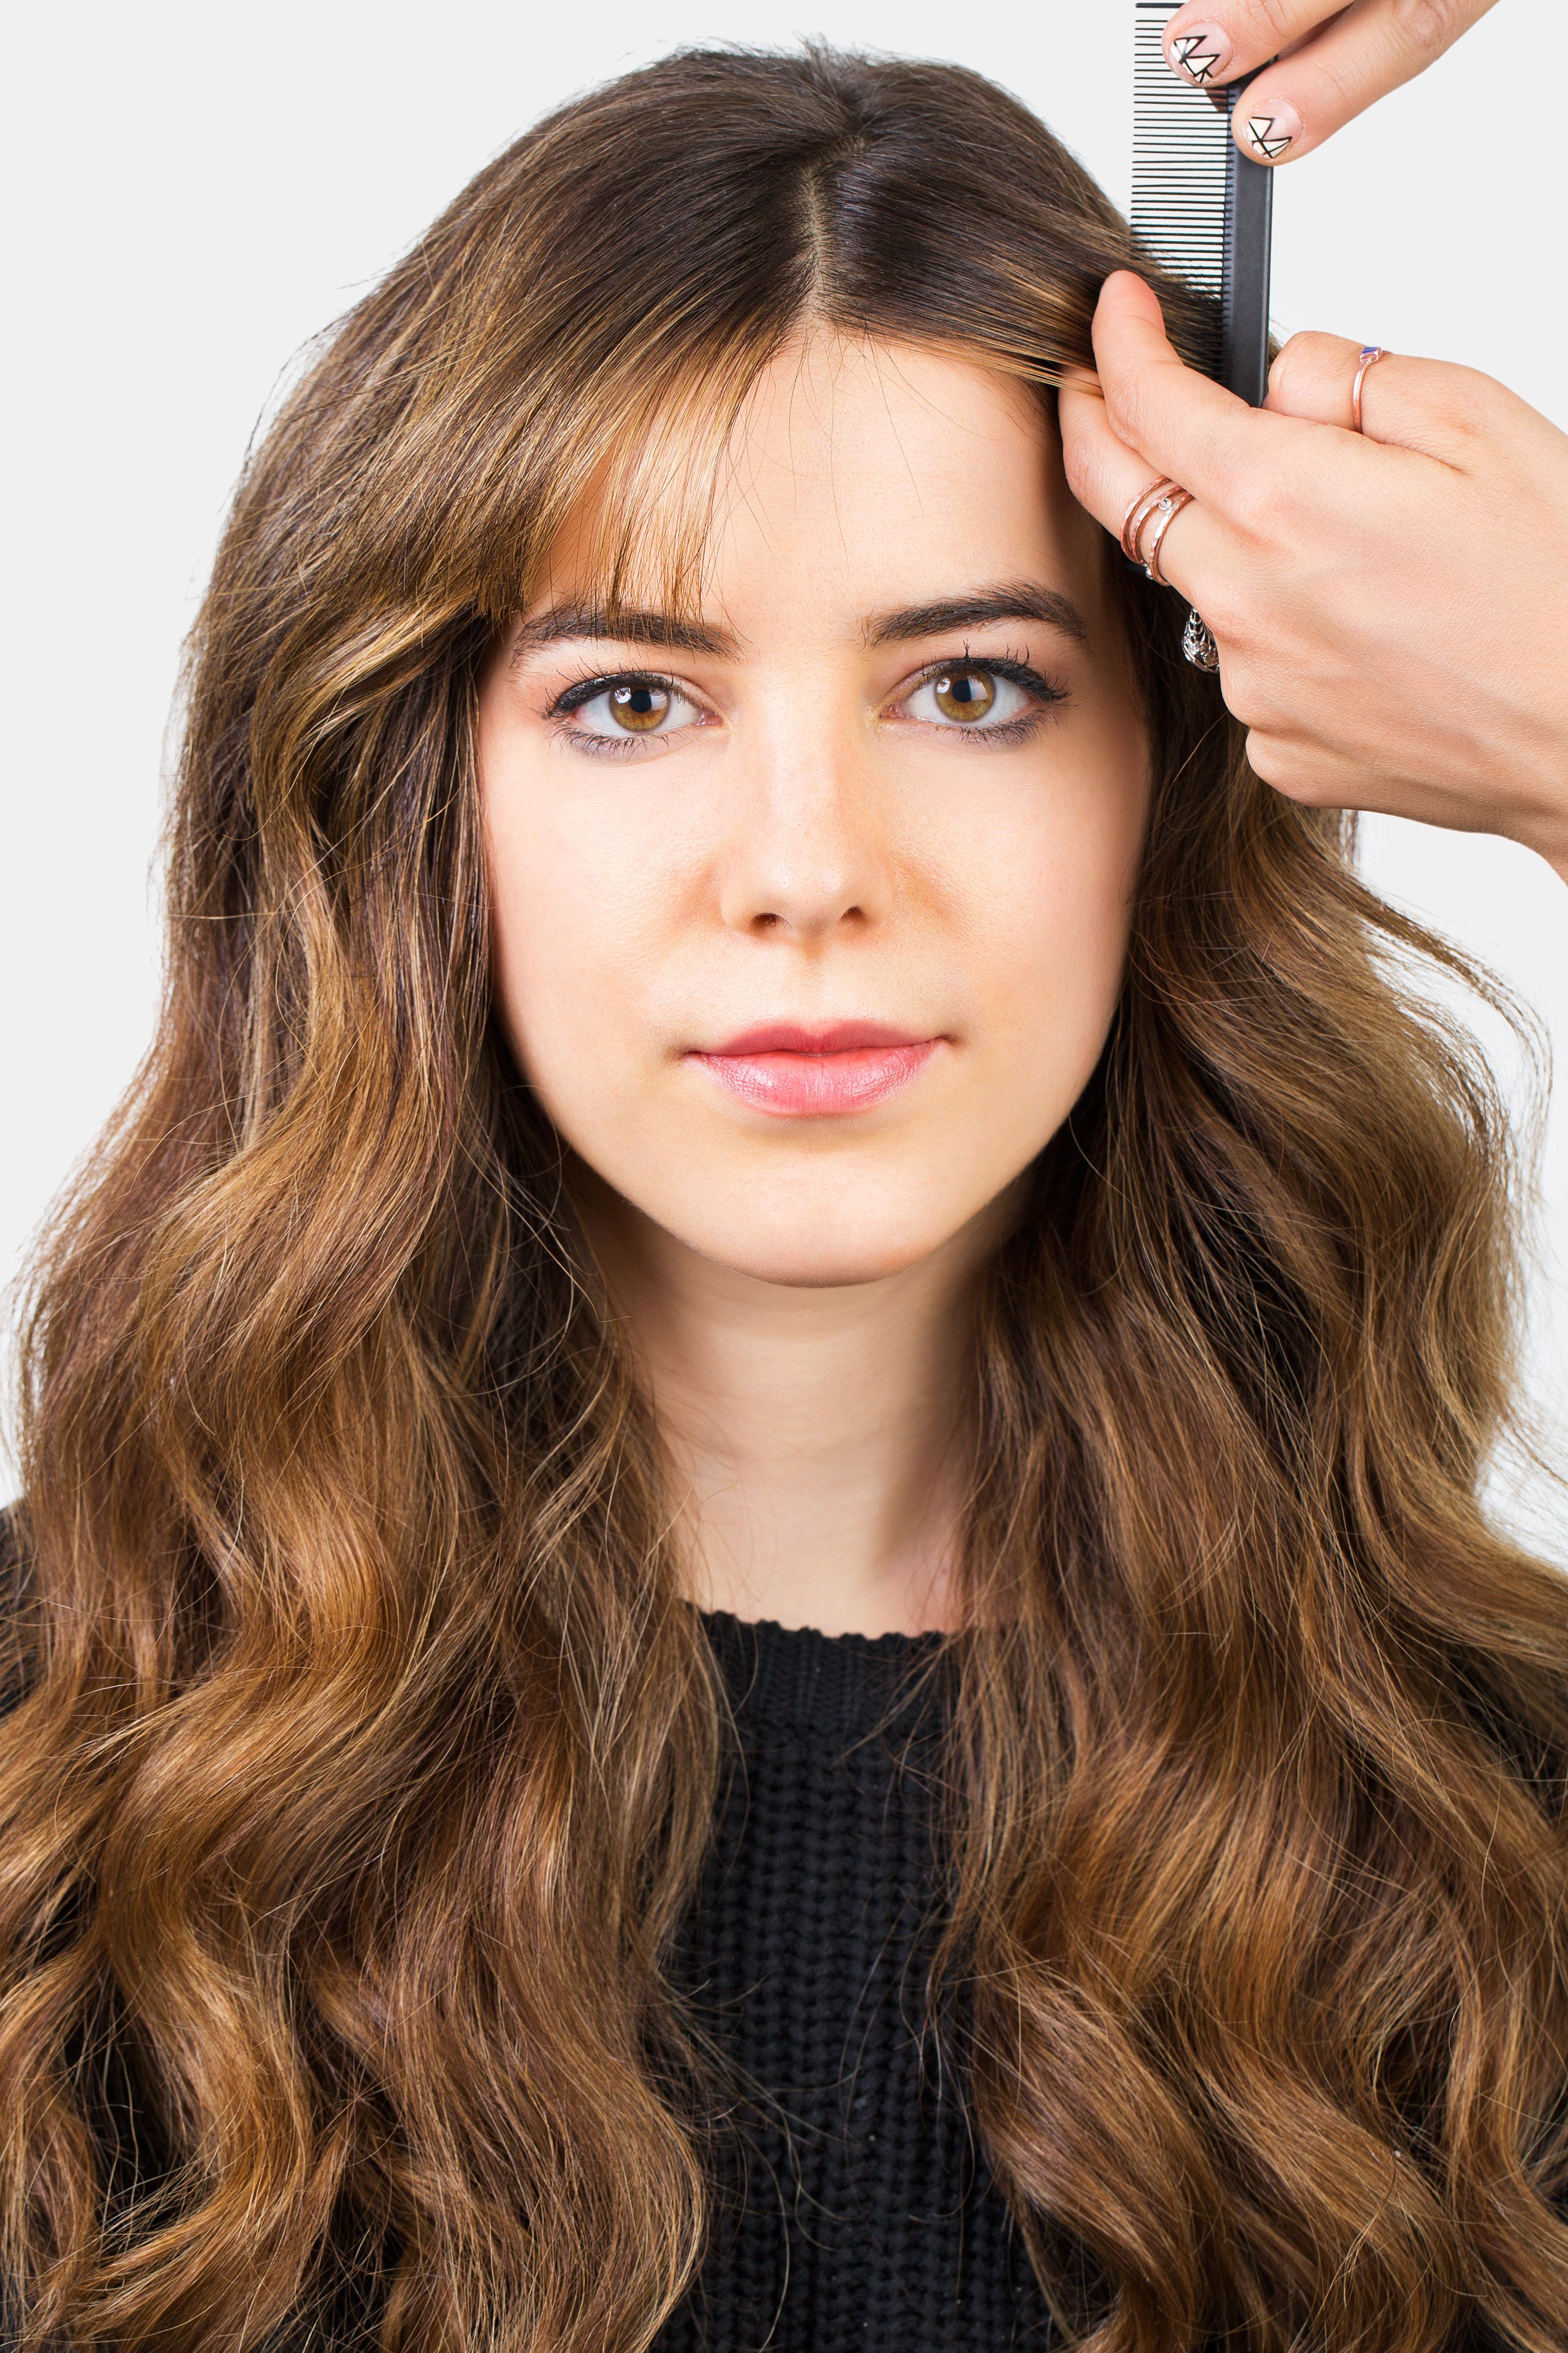 How to Style Bangs When You Have Little Time